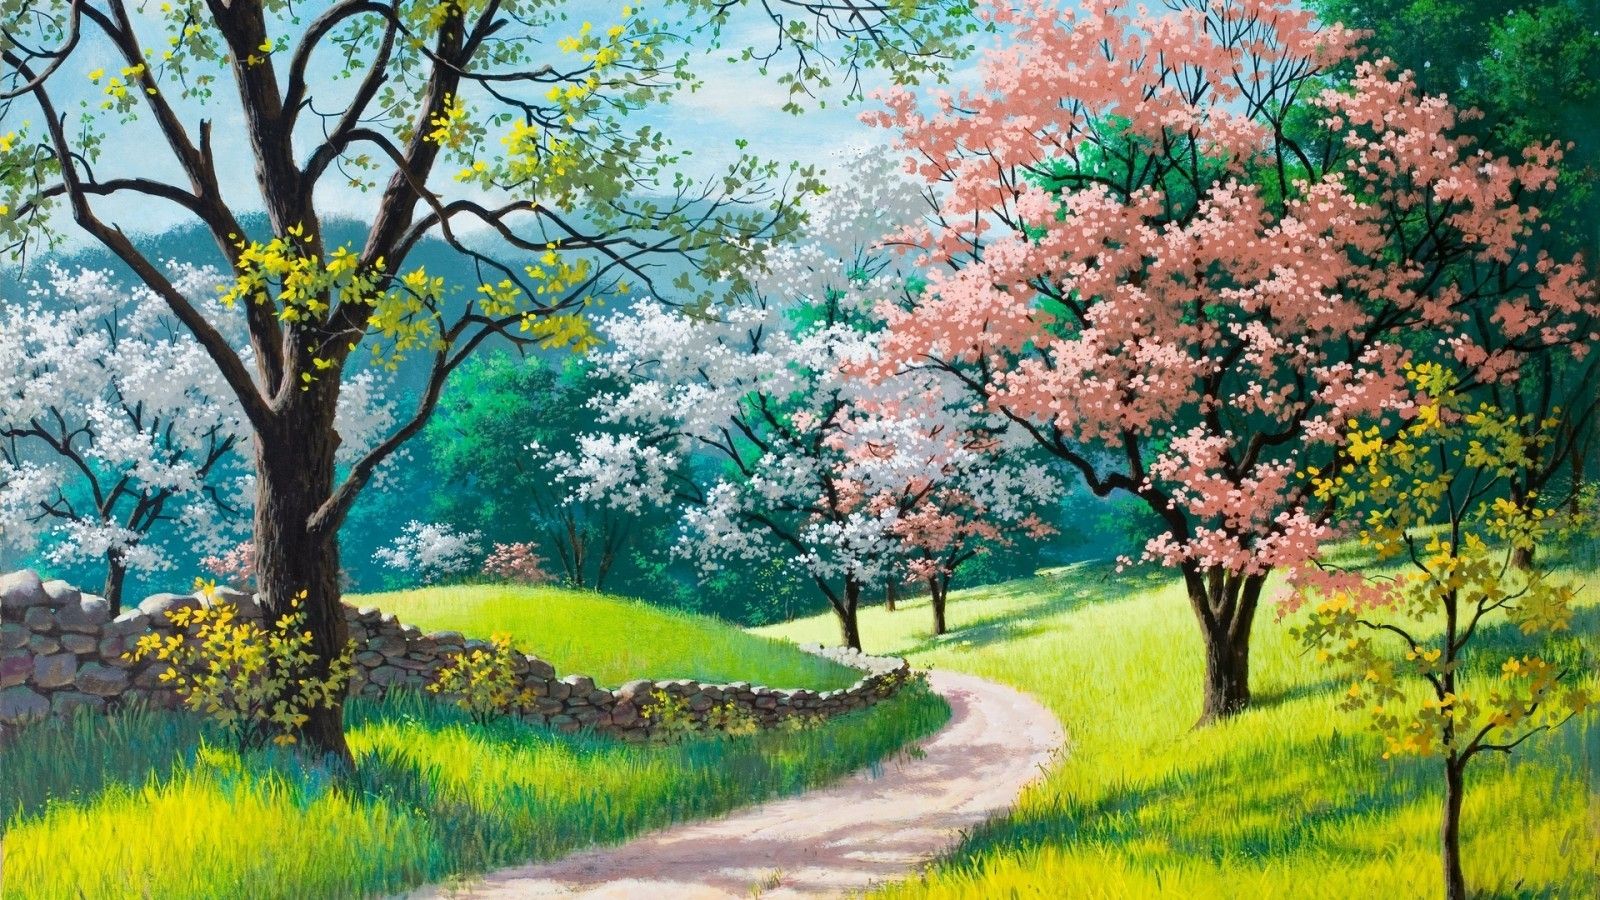 Download 1600x900 Spring, Painting, Trees, Cherry Blossom, Artwork, Path, Fence, Stones Wallpaper